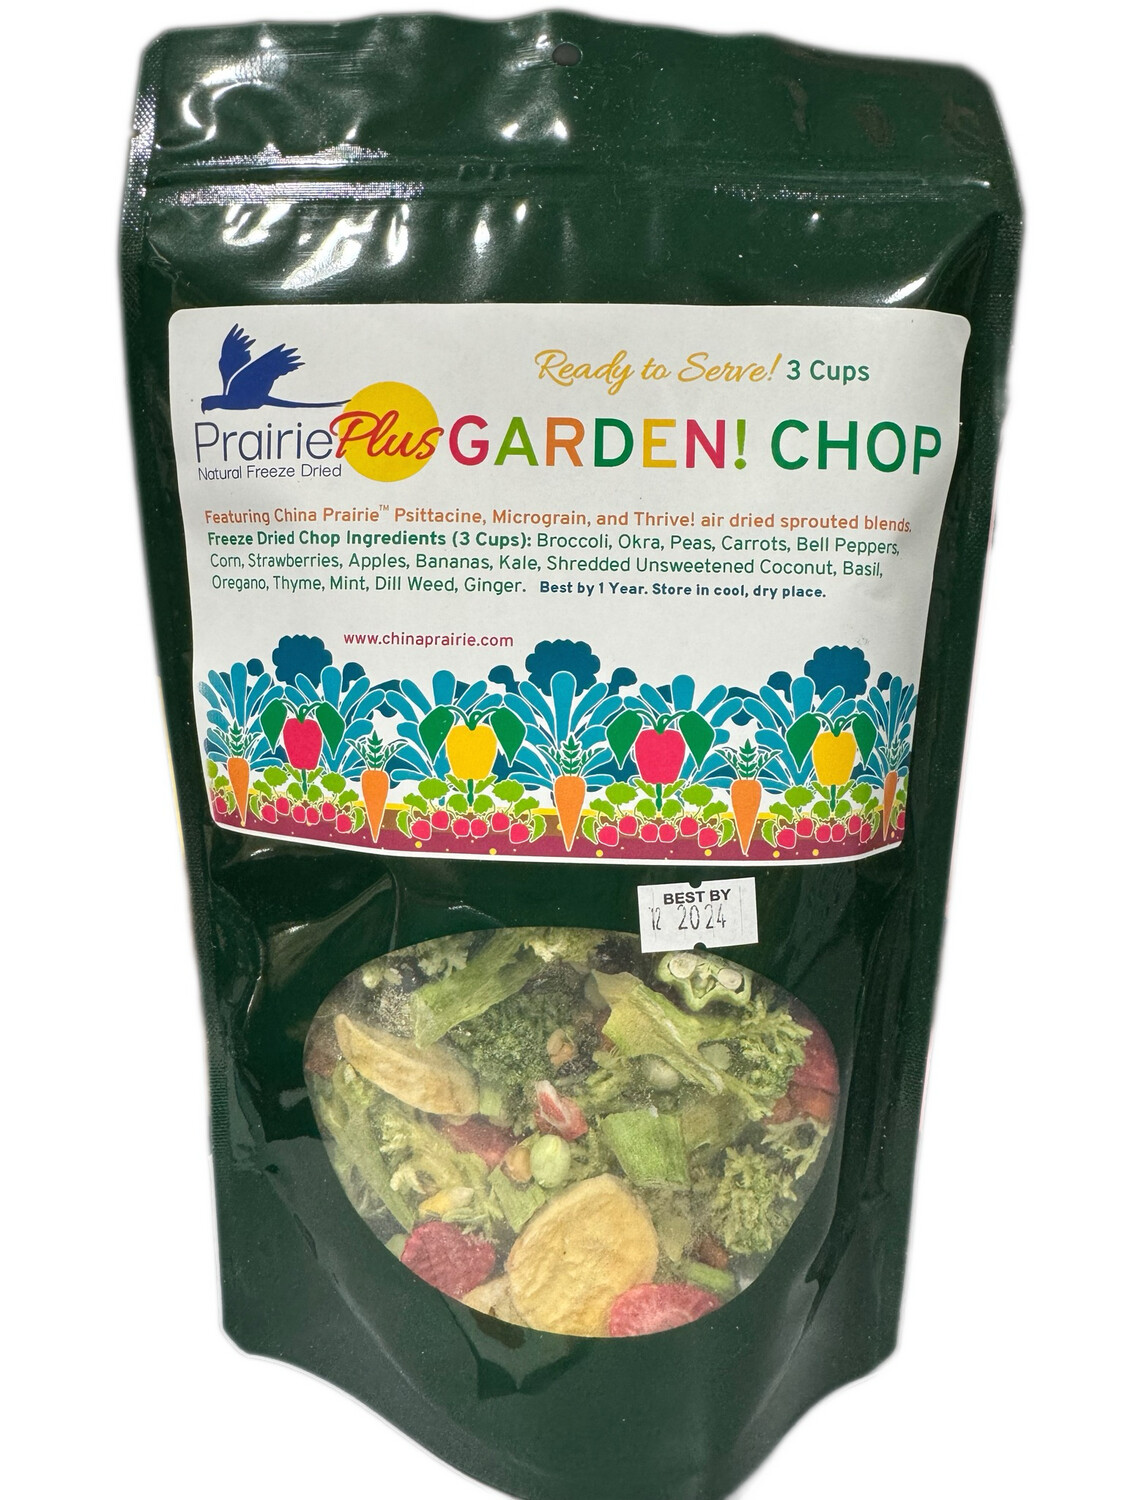 NEW! Garden Chop -- 3 cups freeze dried sprouts and veggie chop from China Prairie (exclusive to us!)